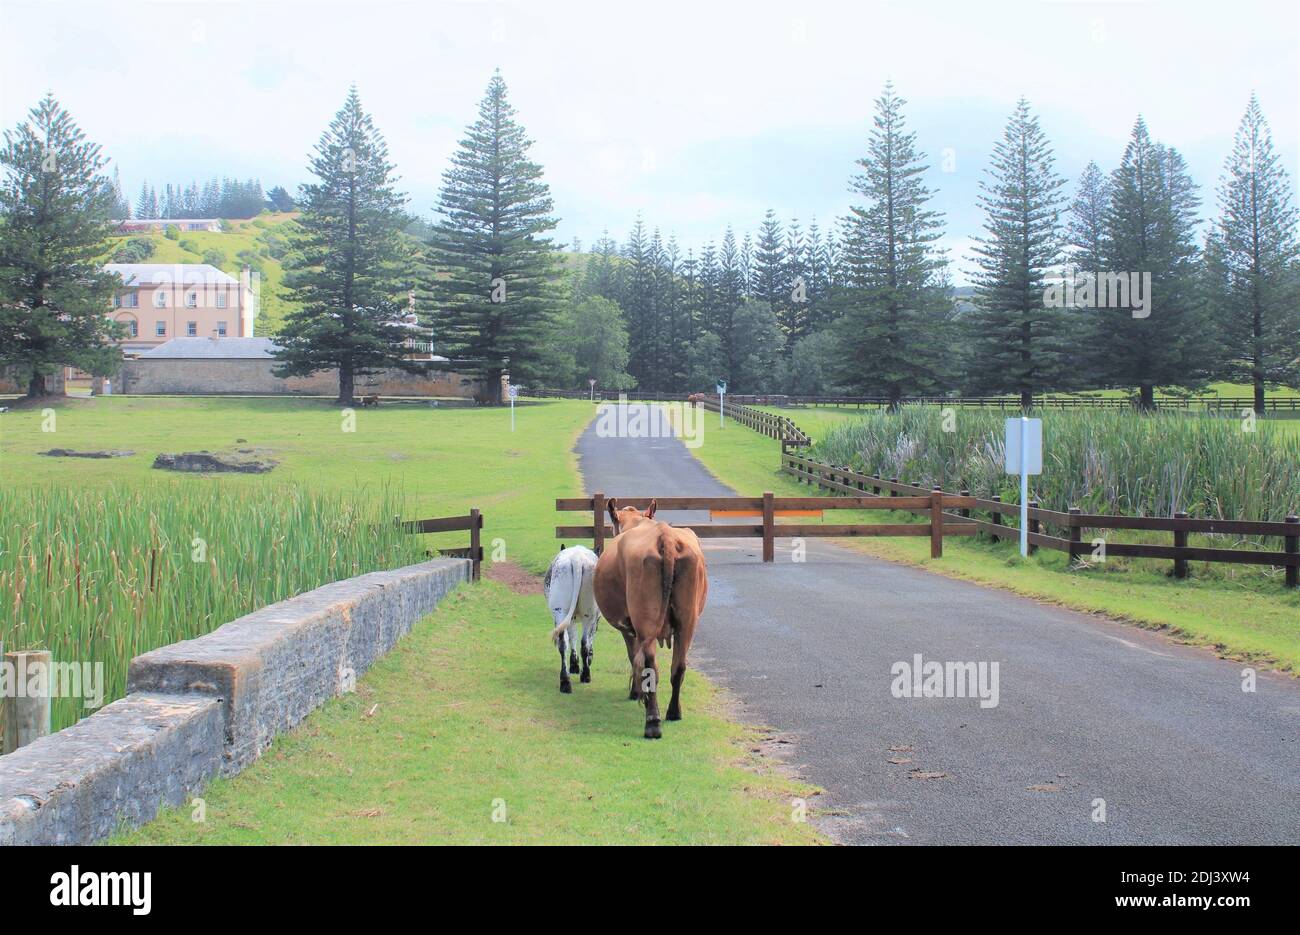 Norfolk Island. World Heritage Area, Kingston. Open-grazing Cows. Endemic Norfolk Island Pines in Background. Colonial Military Barracks visible. Stock Photo